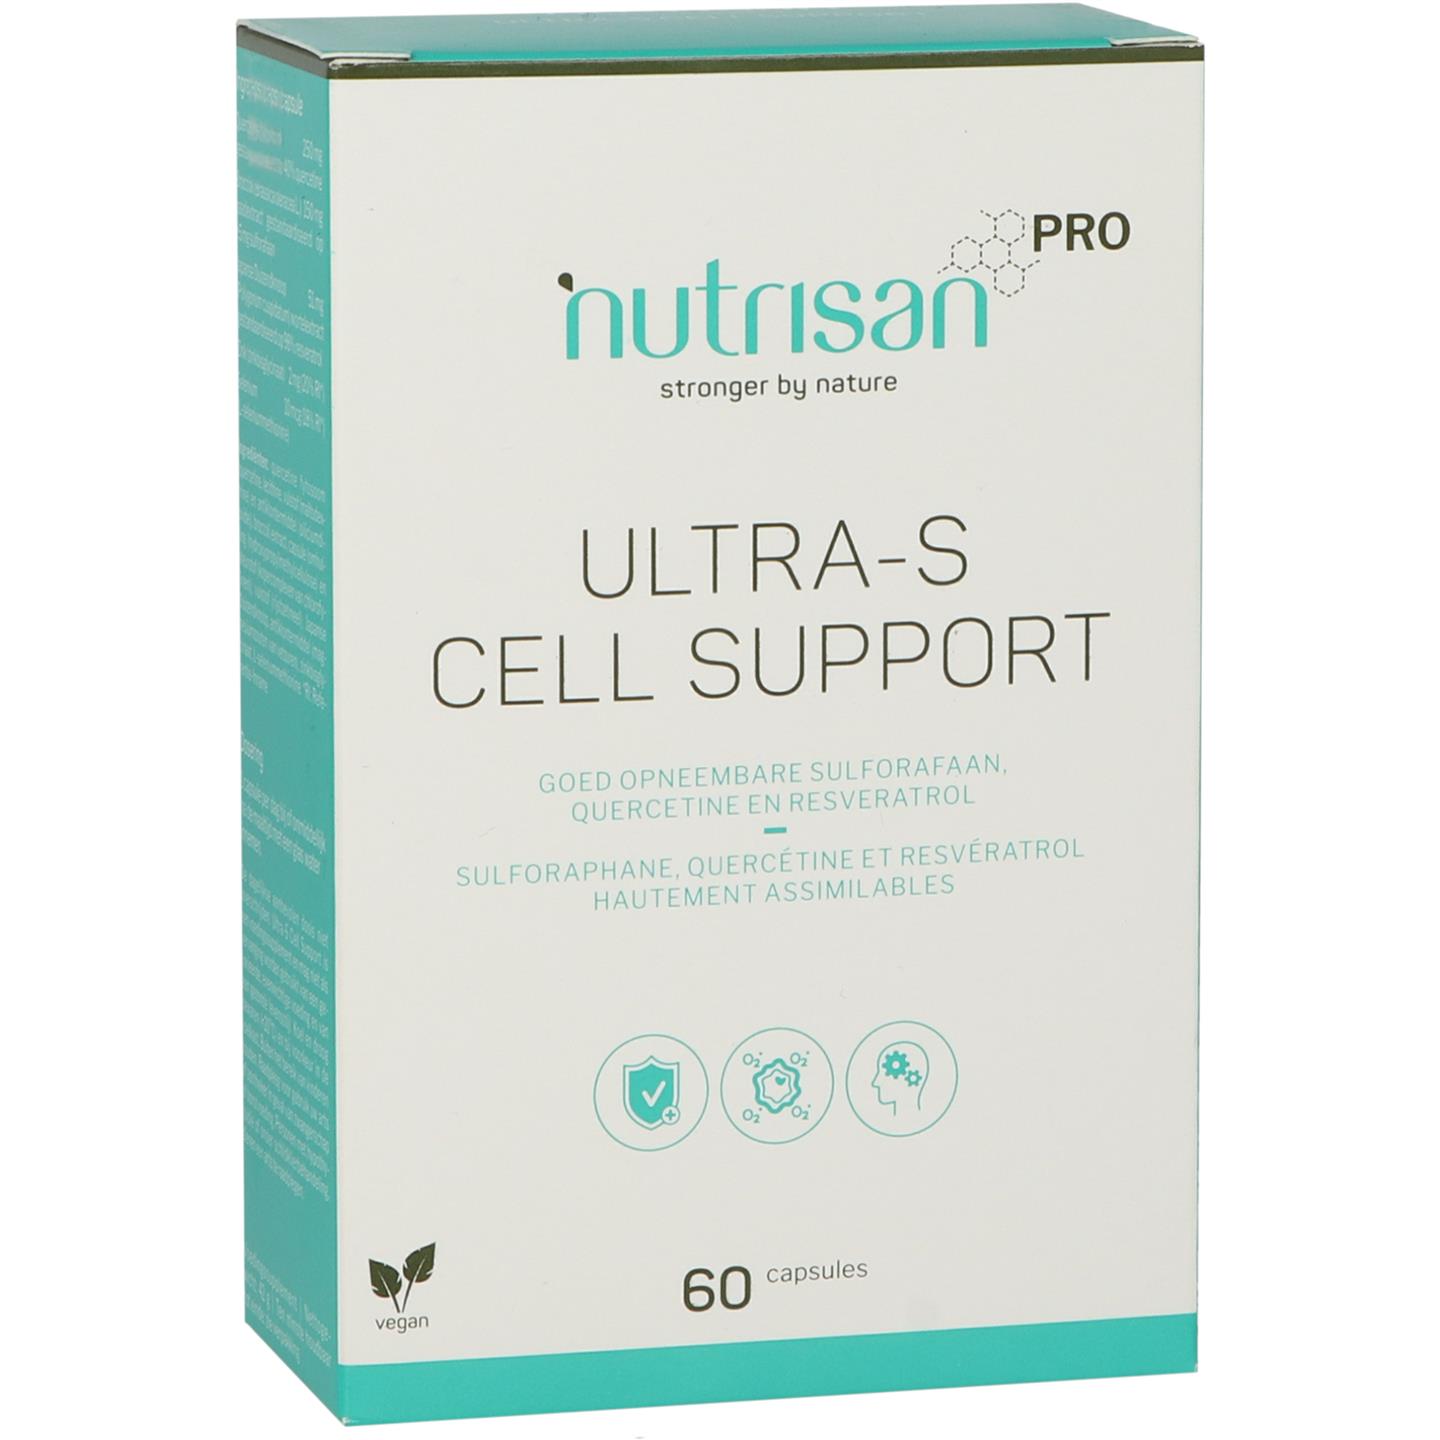 Ultra-S Cell Support